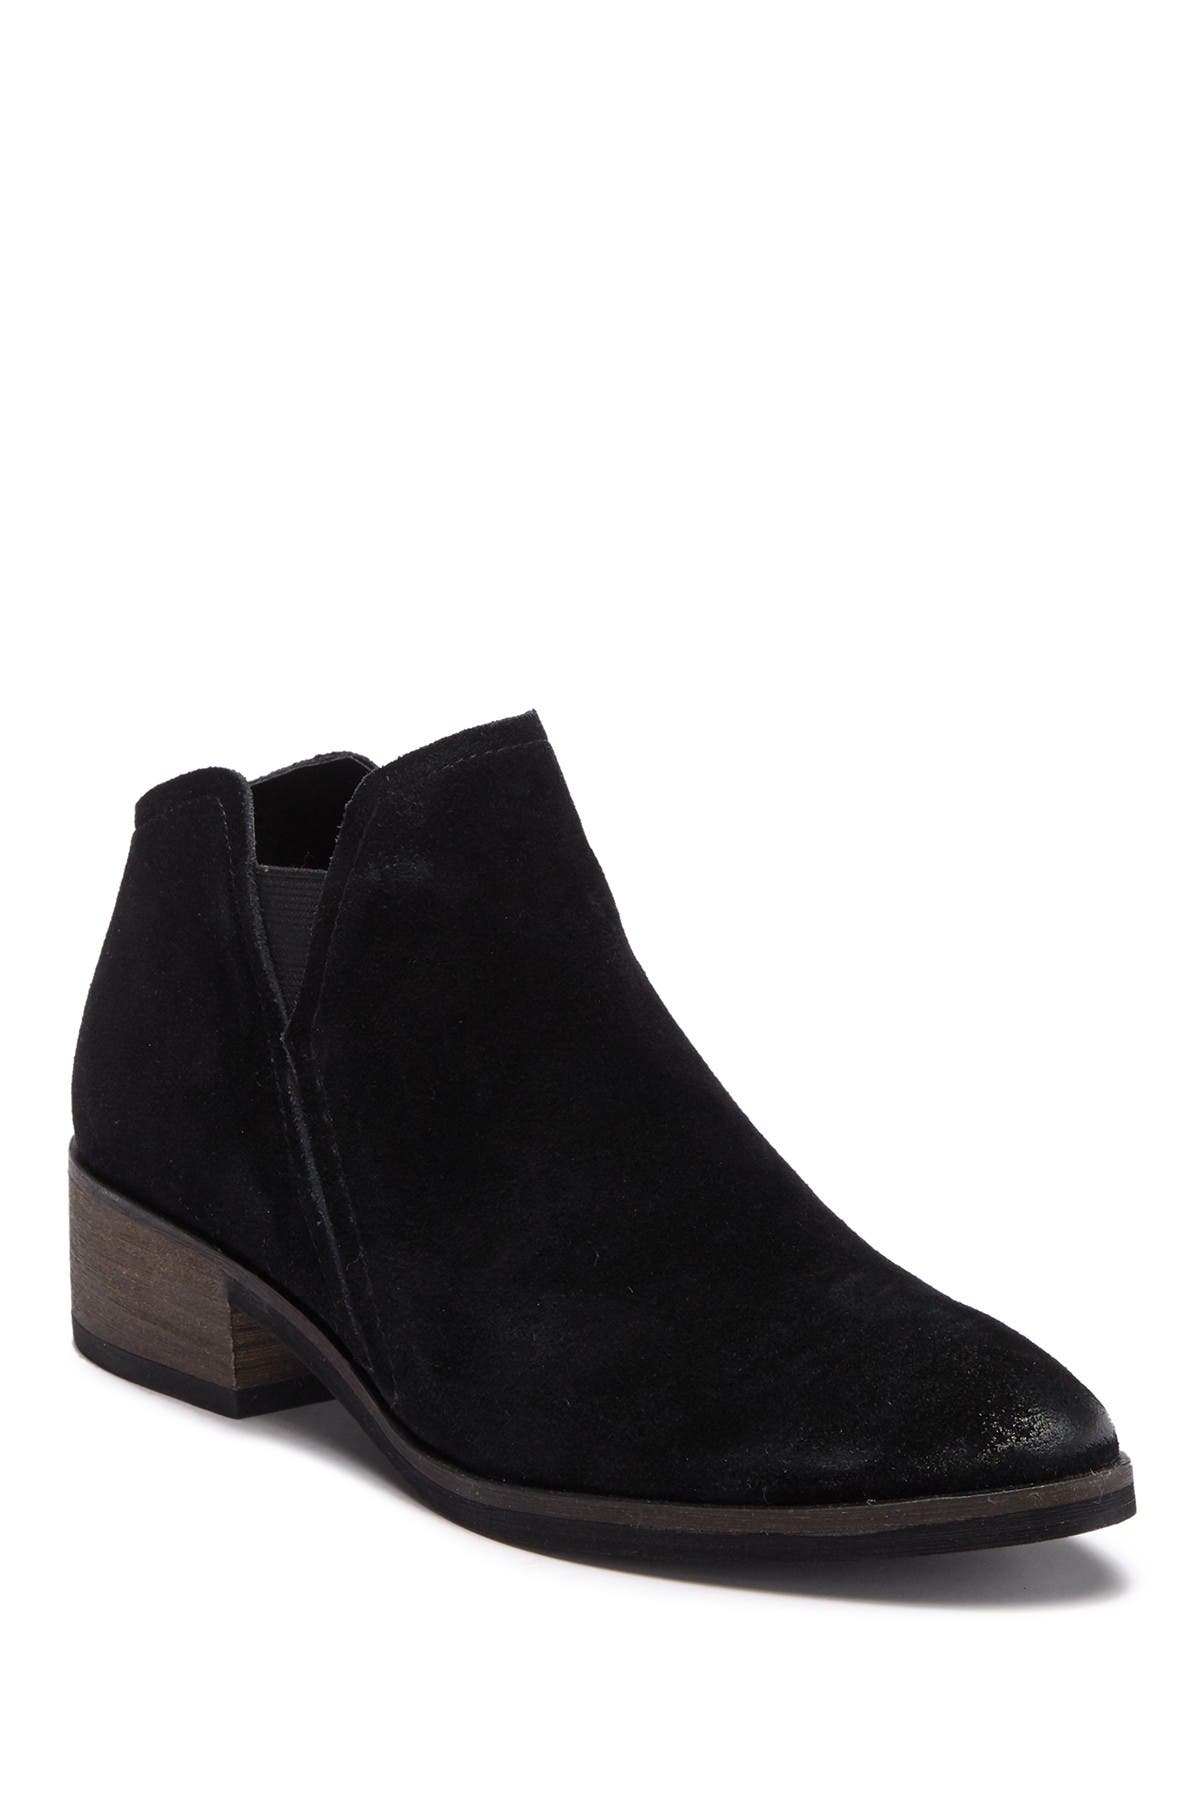 Dolce Vita | Tay Low Bootie | Nordstrom 